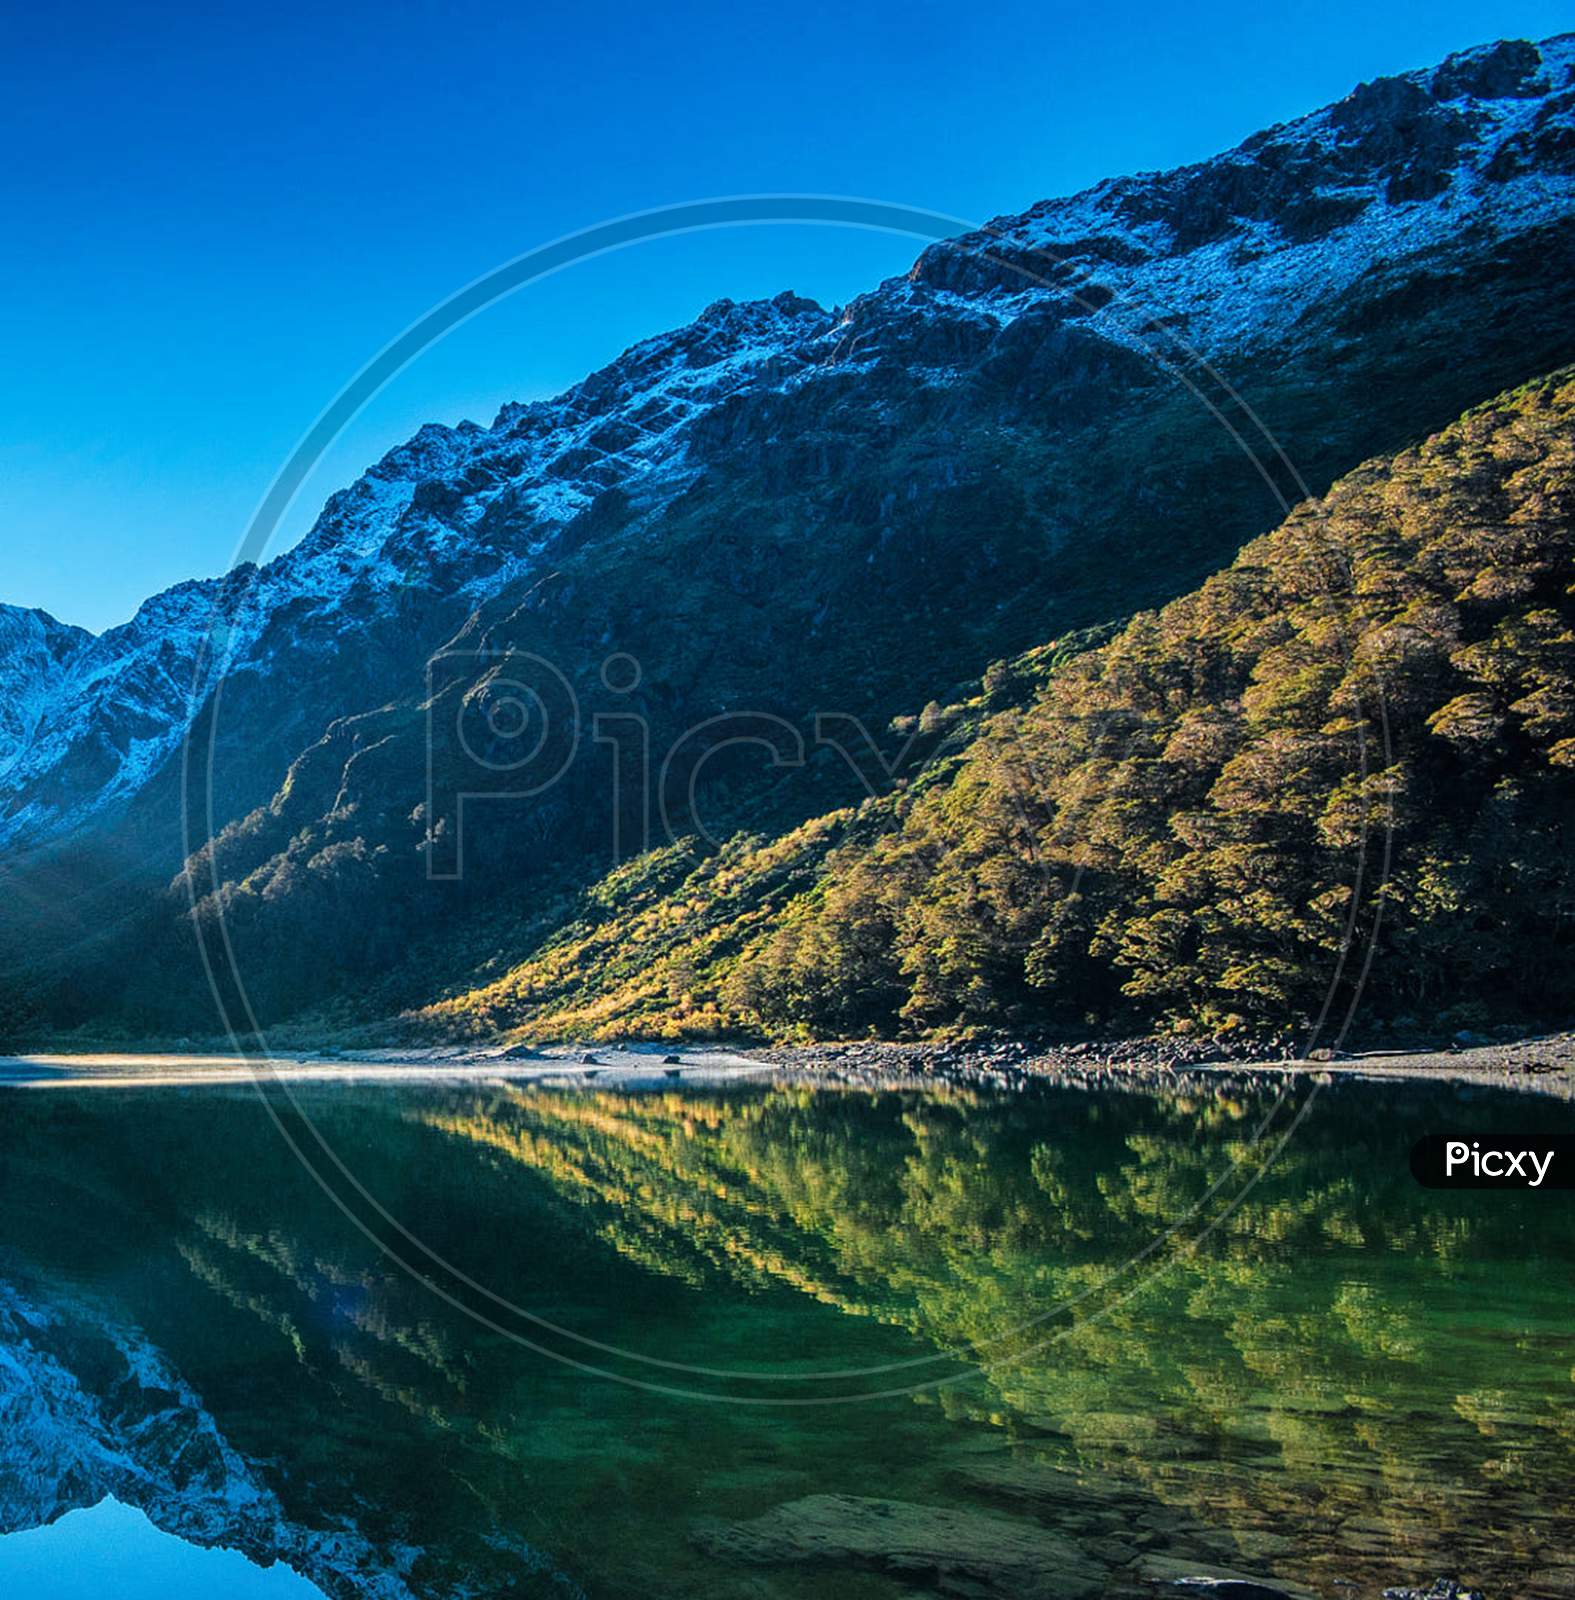 Beautiful pictures of New Zealand